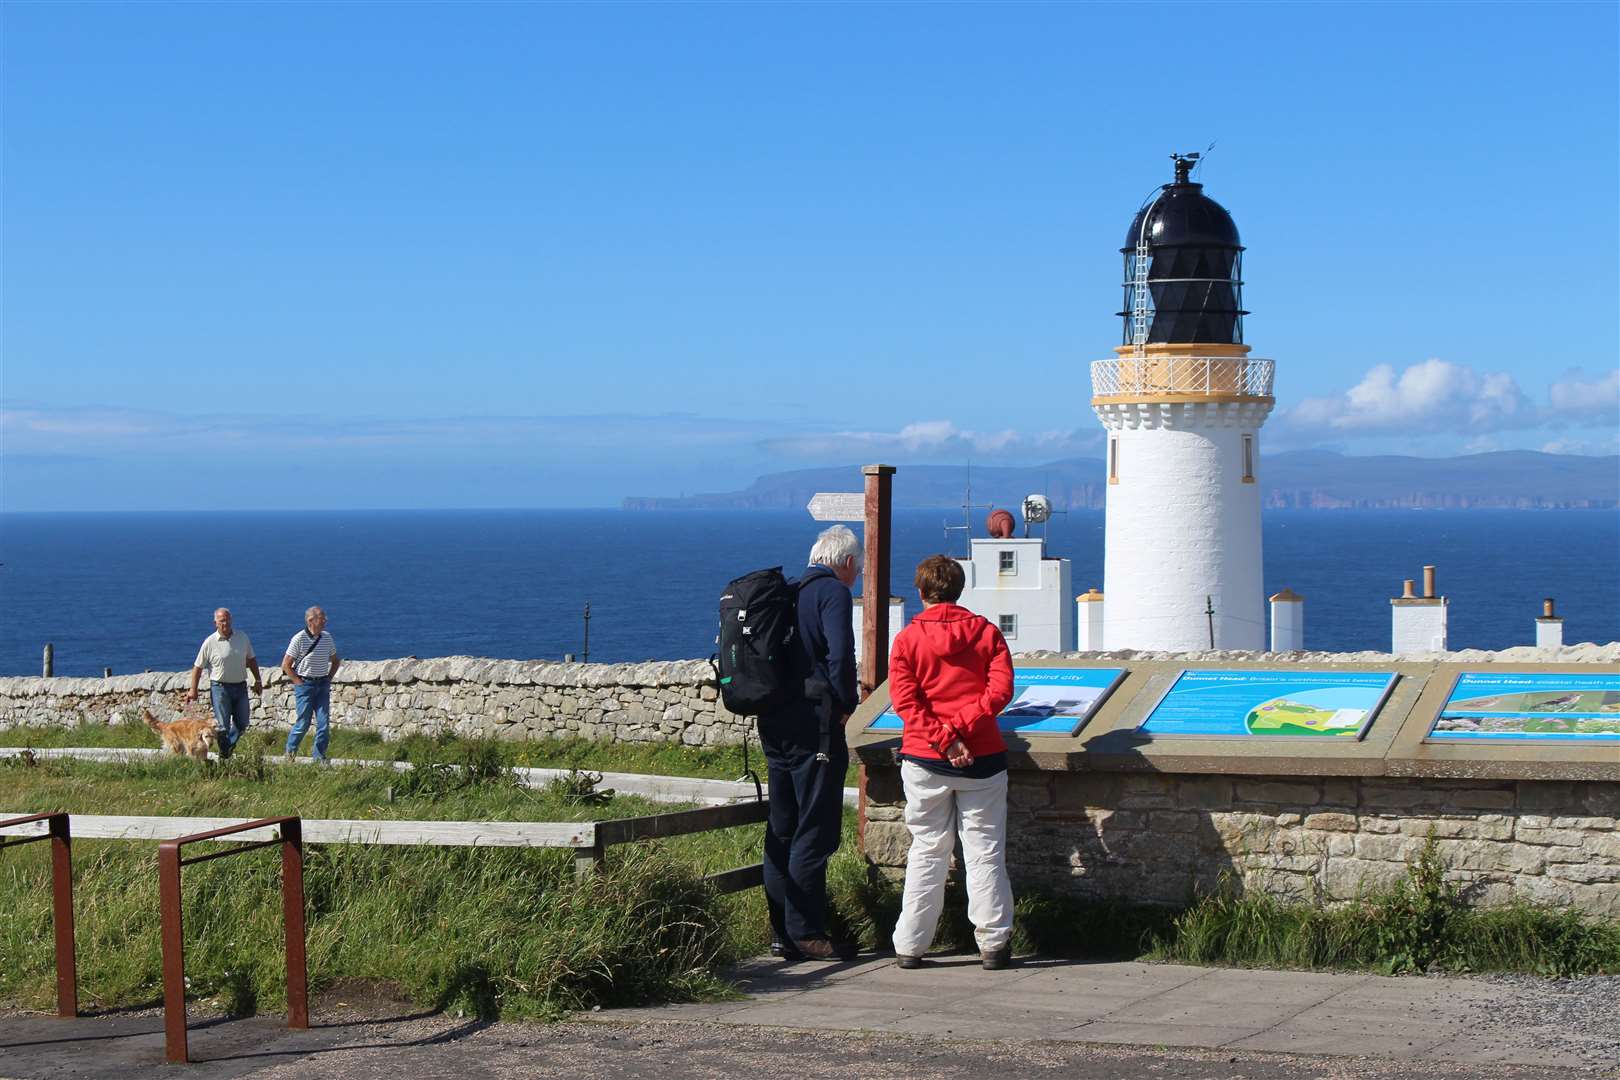 Popular tourist spots such as Dunnet Head could be subject to voluntary parking charges.